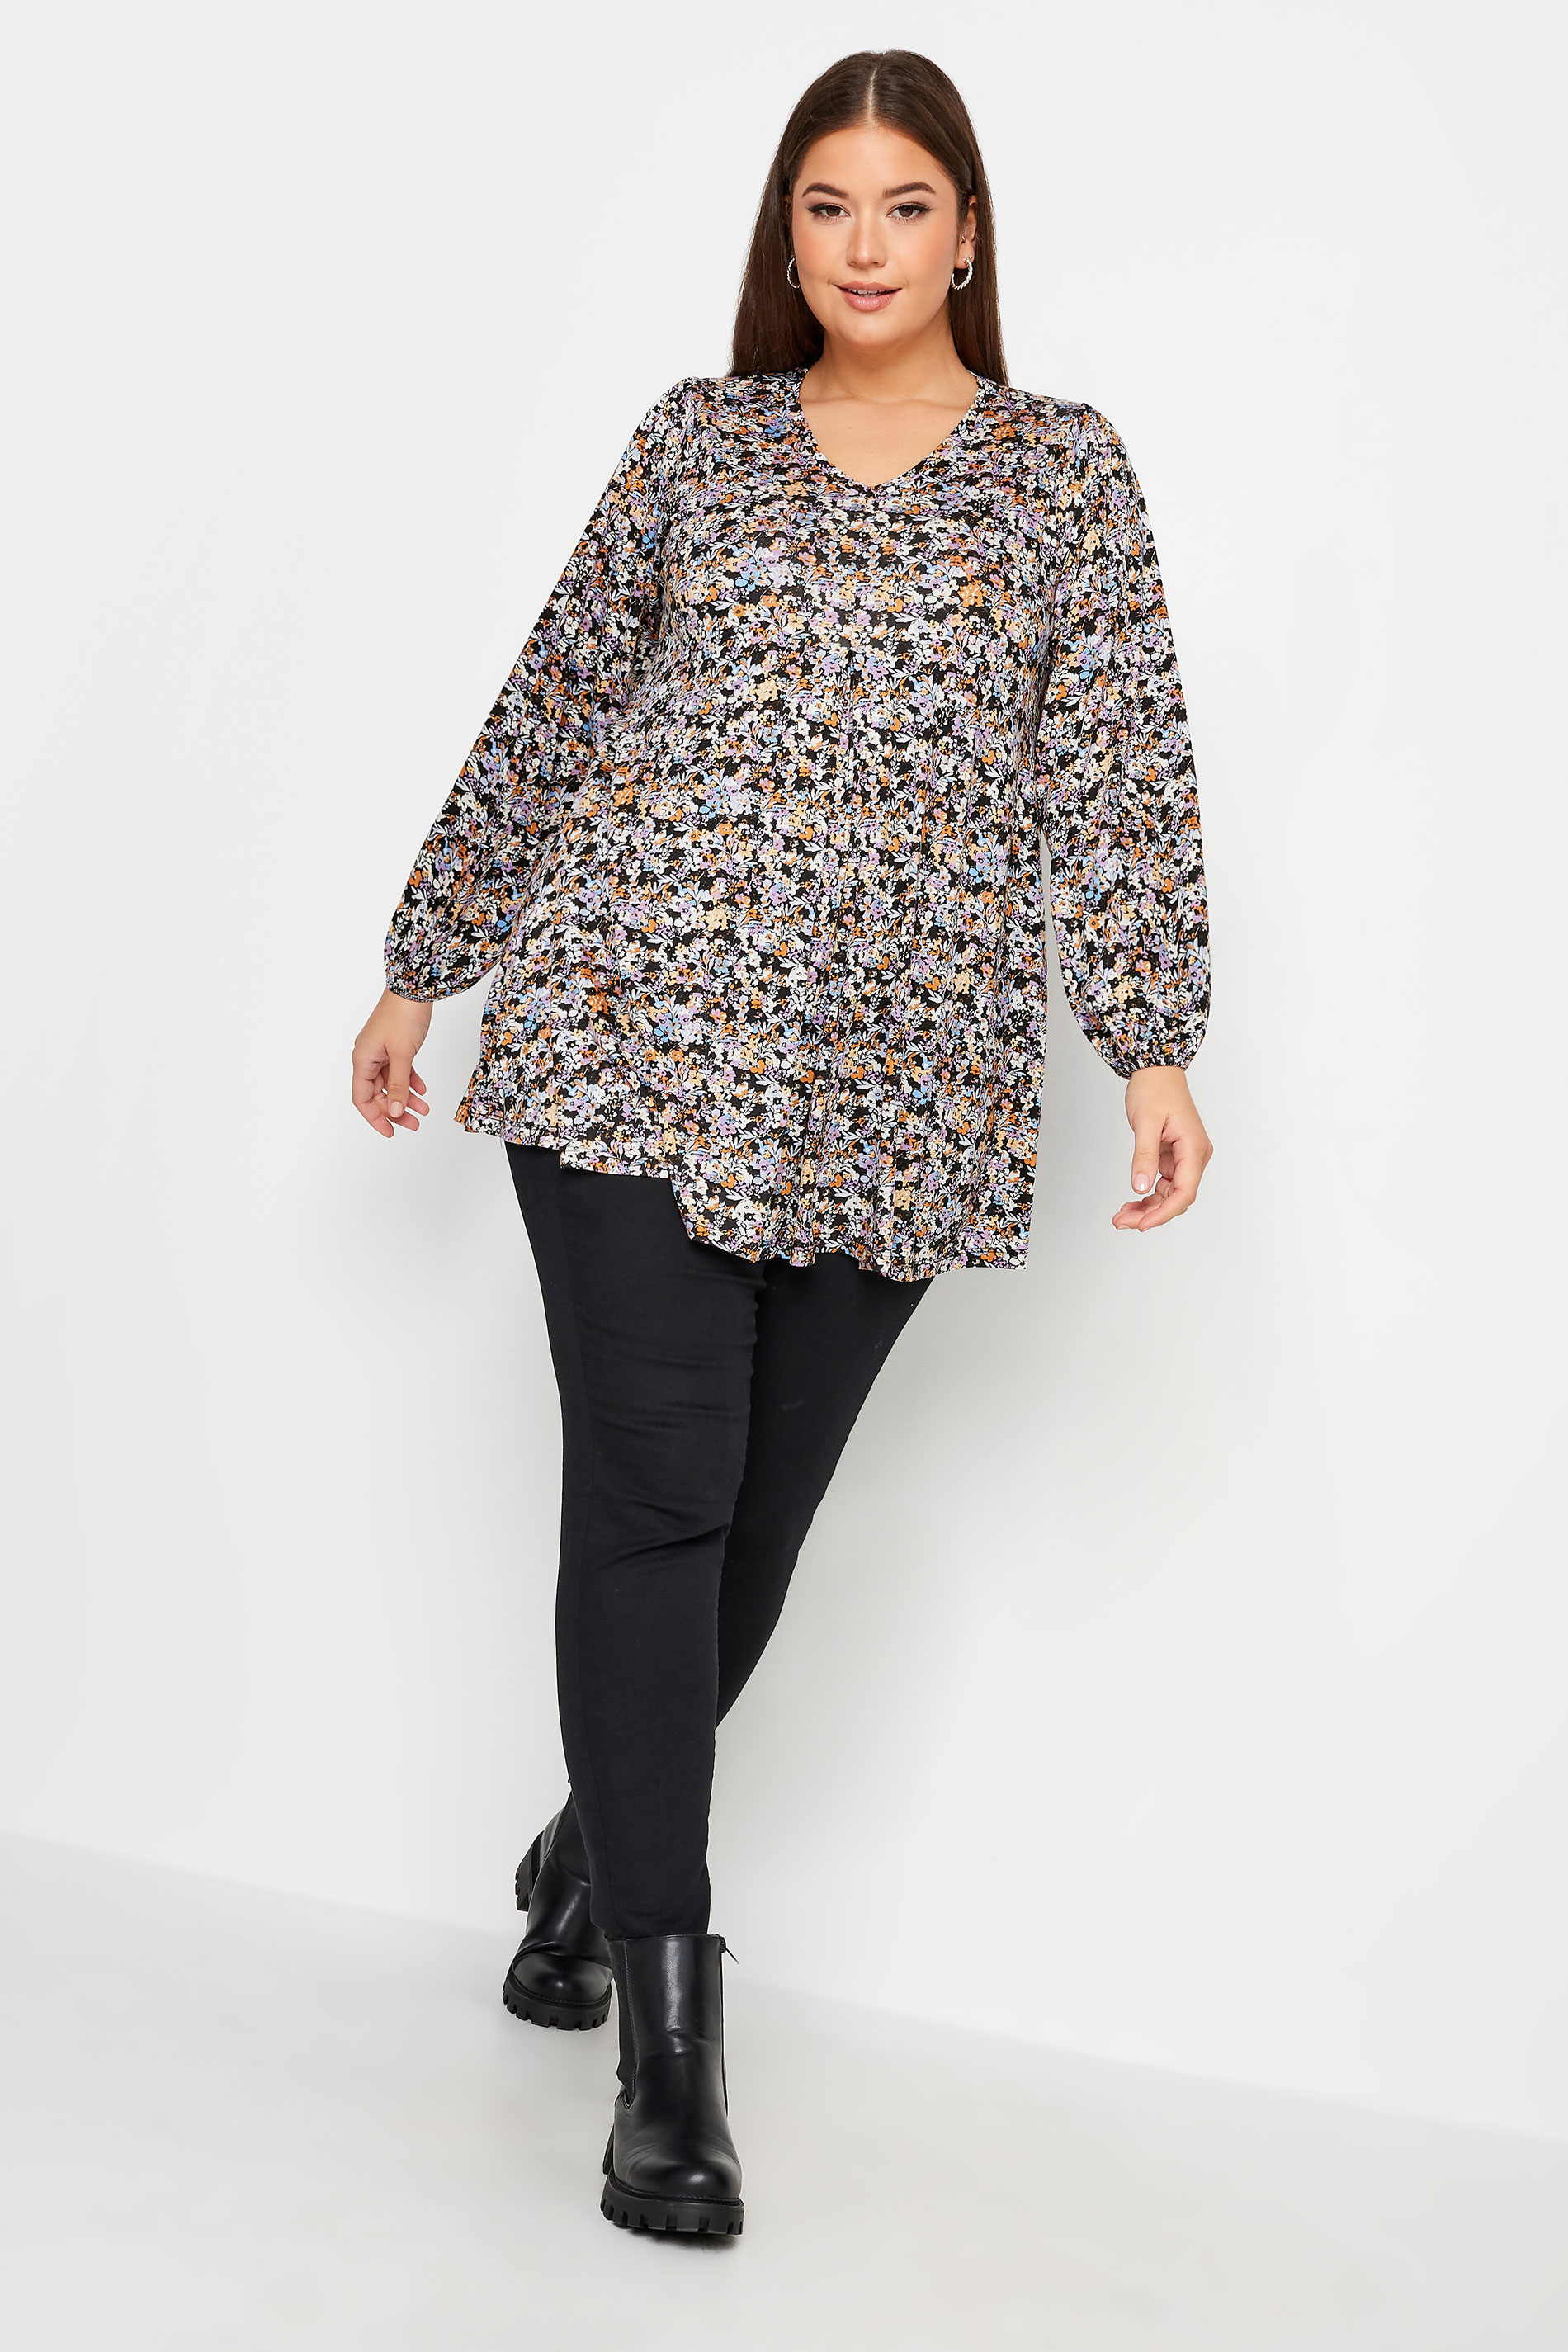 YOURS Plus Size Black Floral Print Long Sleeve Swing Top | Yours Clothing 2